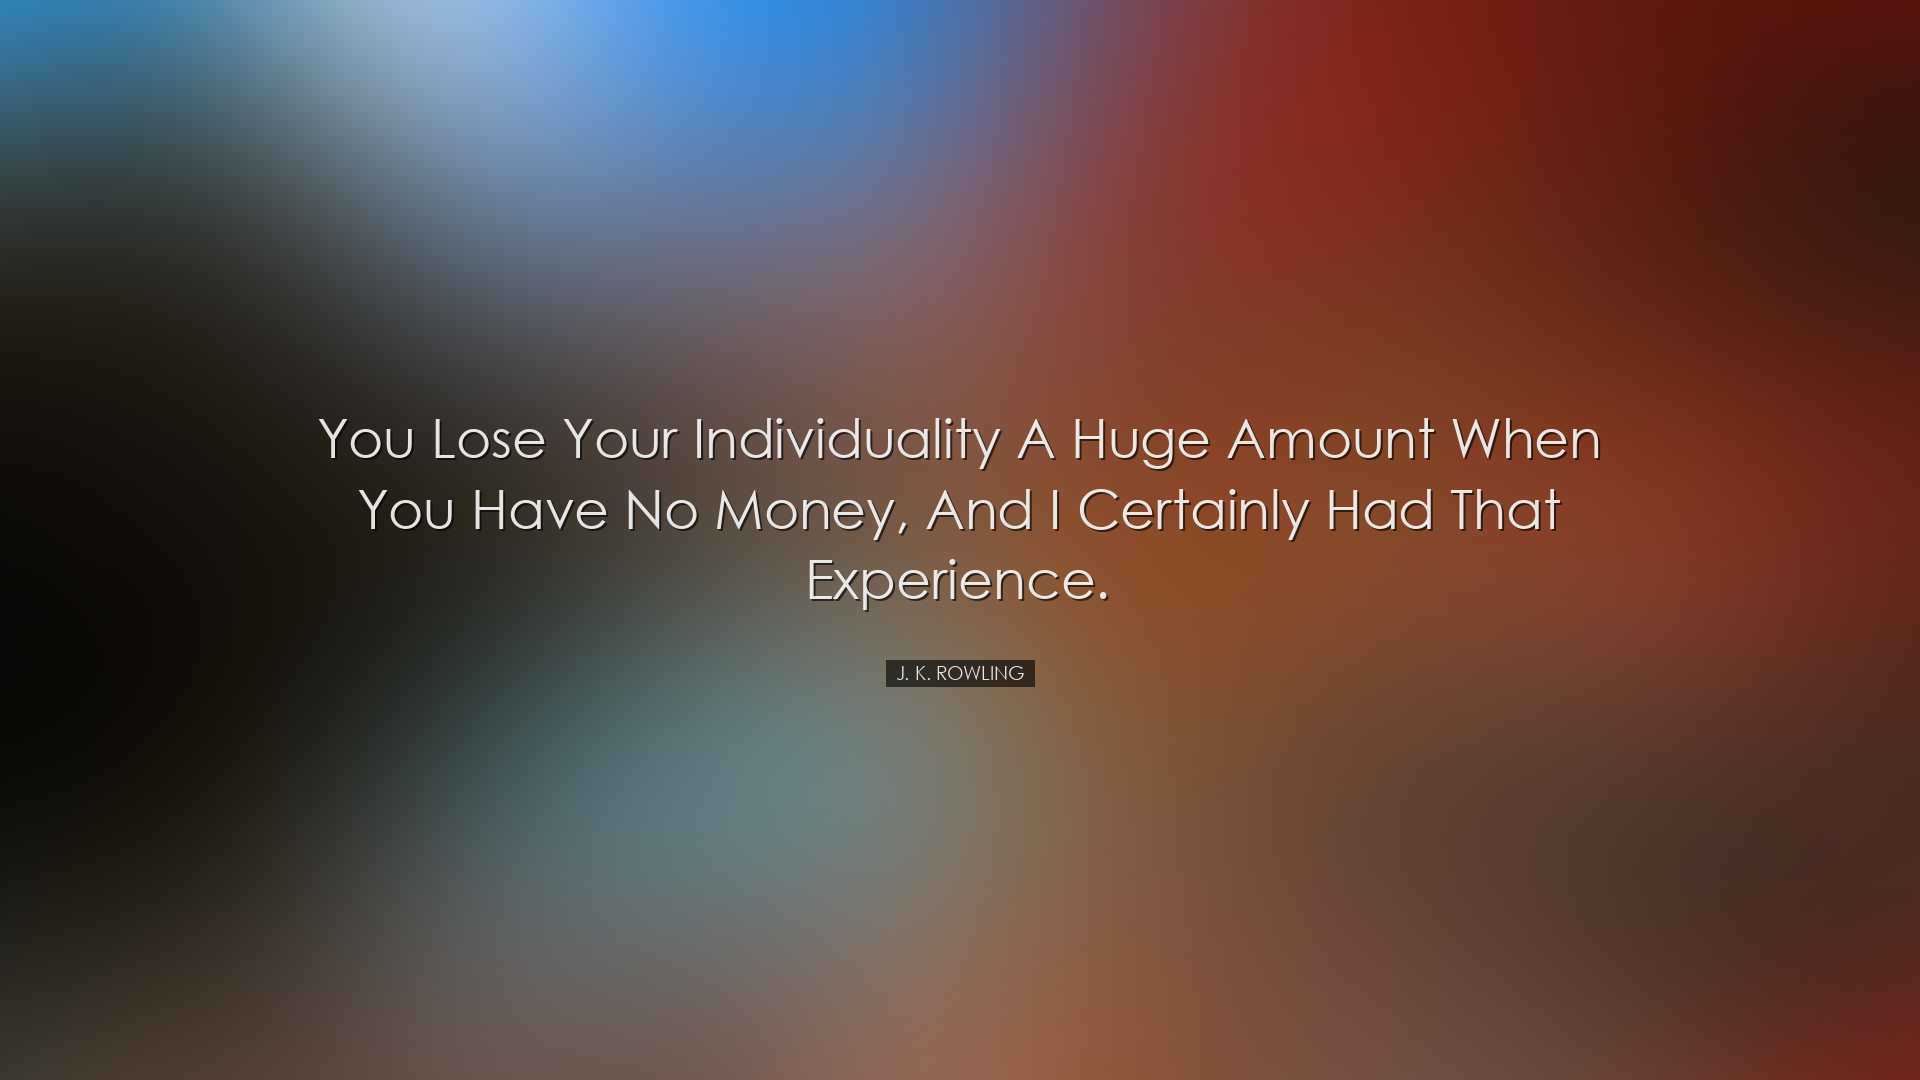 You lose your individuality a huge amount when you have no money,